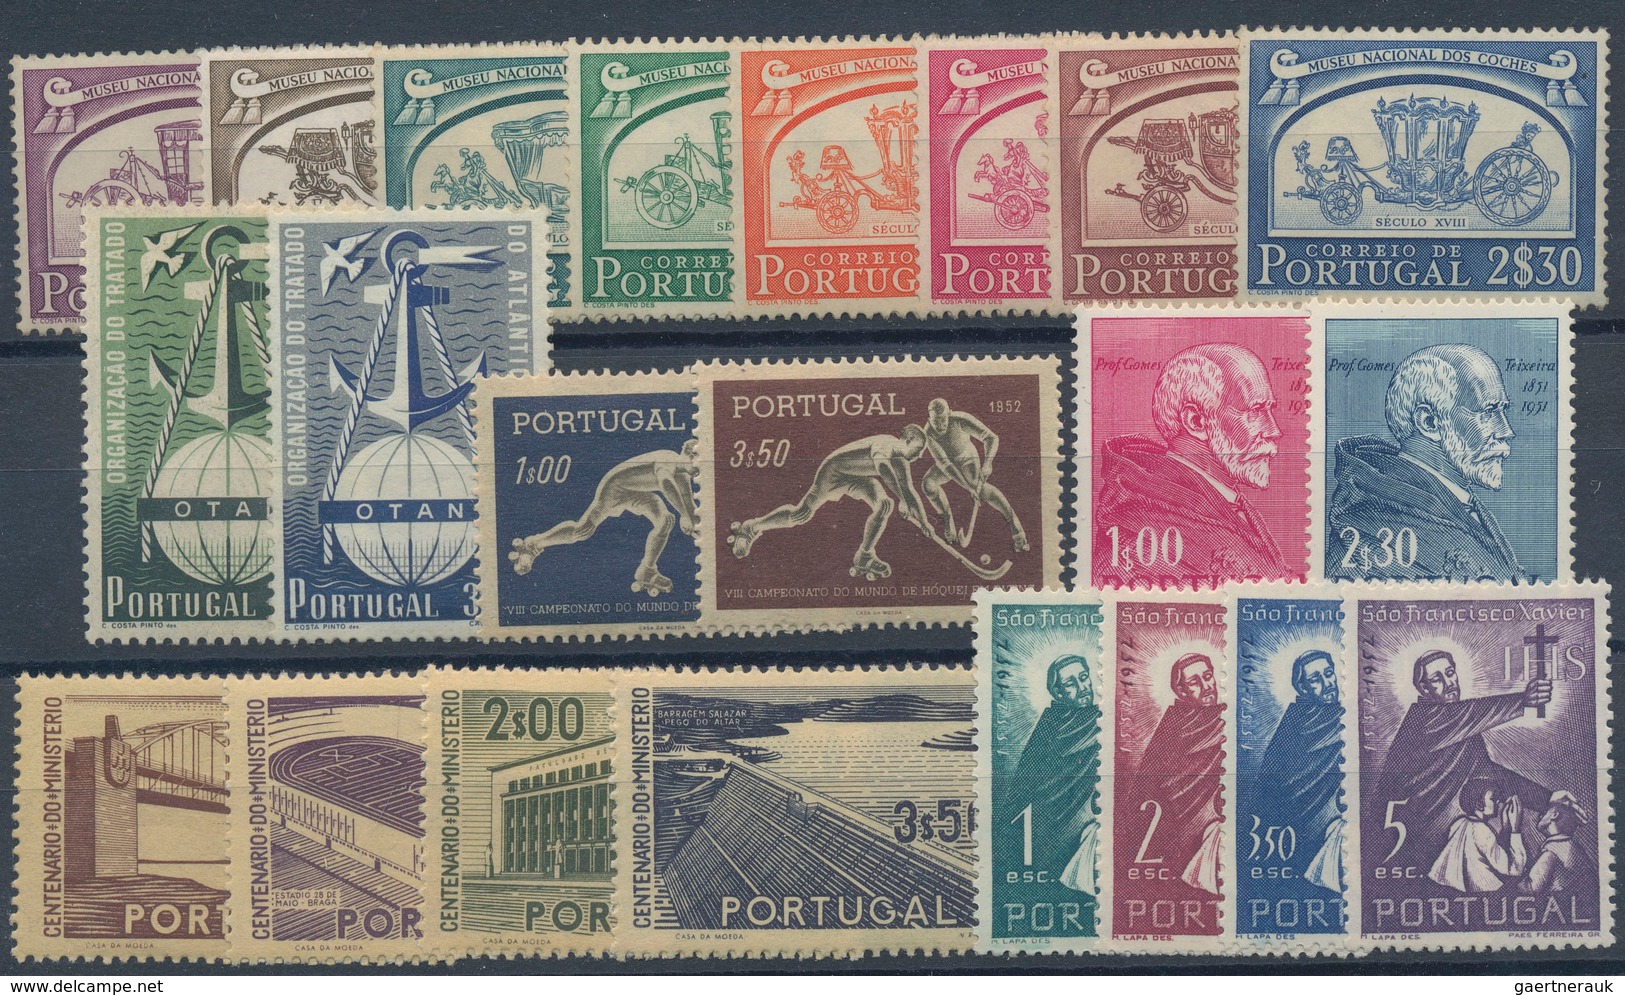 Portugal: 1923/1984, substantial accumulation on stockcards with 50 sets "First flight Lisboa-Brasil